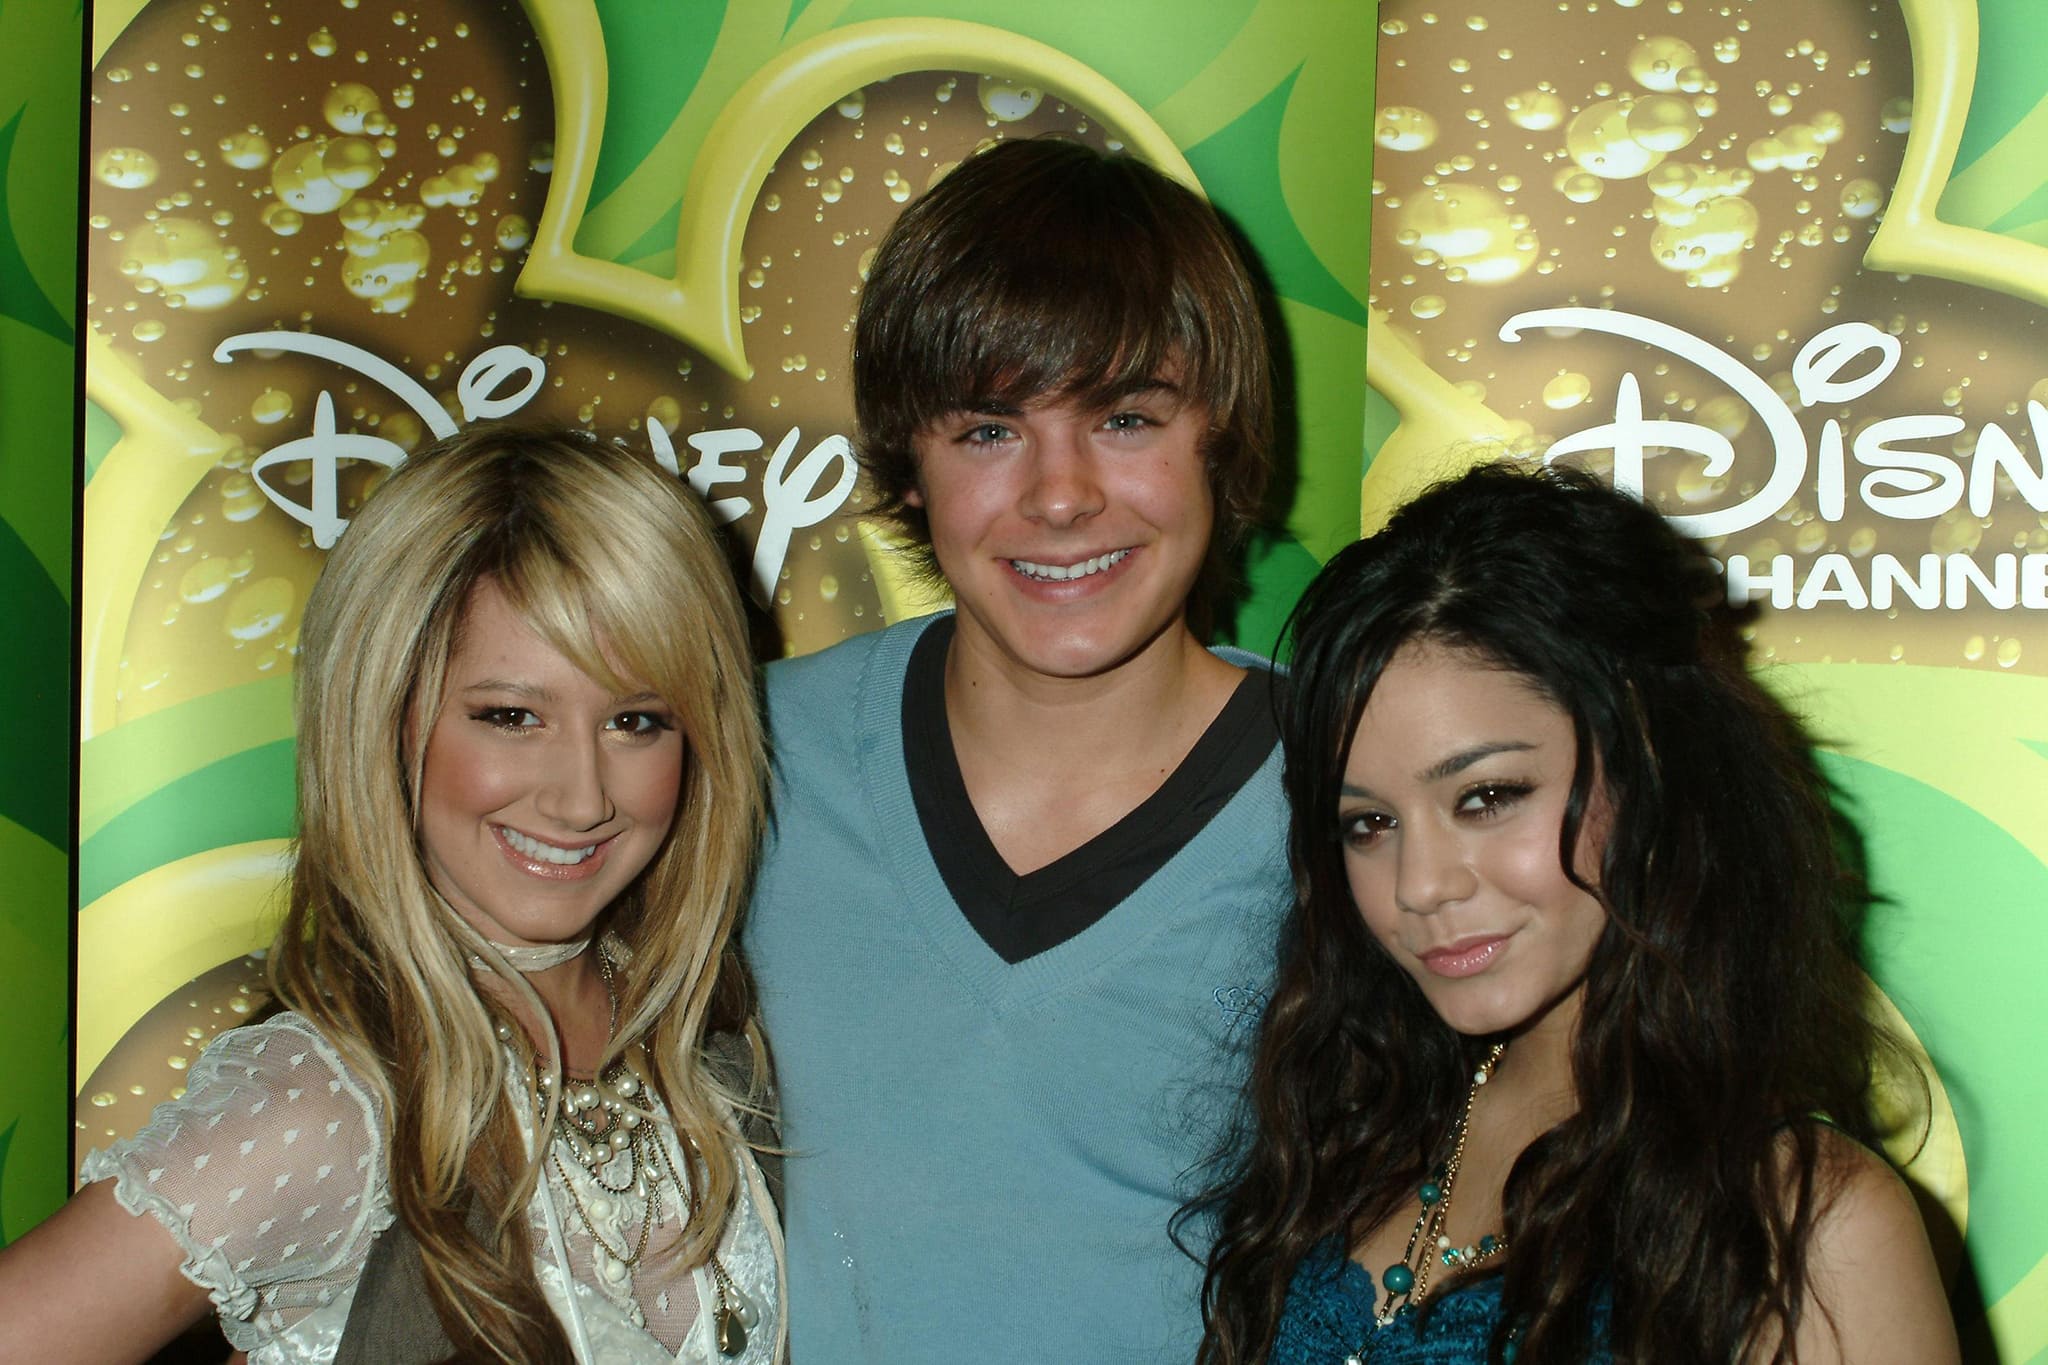 Ashley Tisdale, Zac Efron and Vanessa Hudgens pose for photos in front of a Disney Channel-branded backdrop